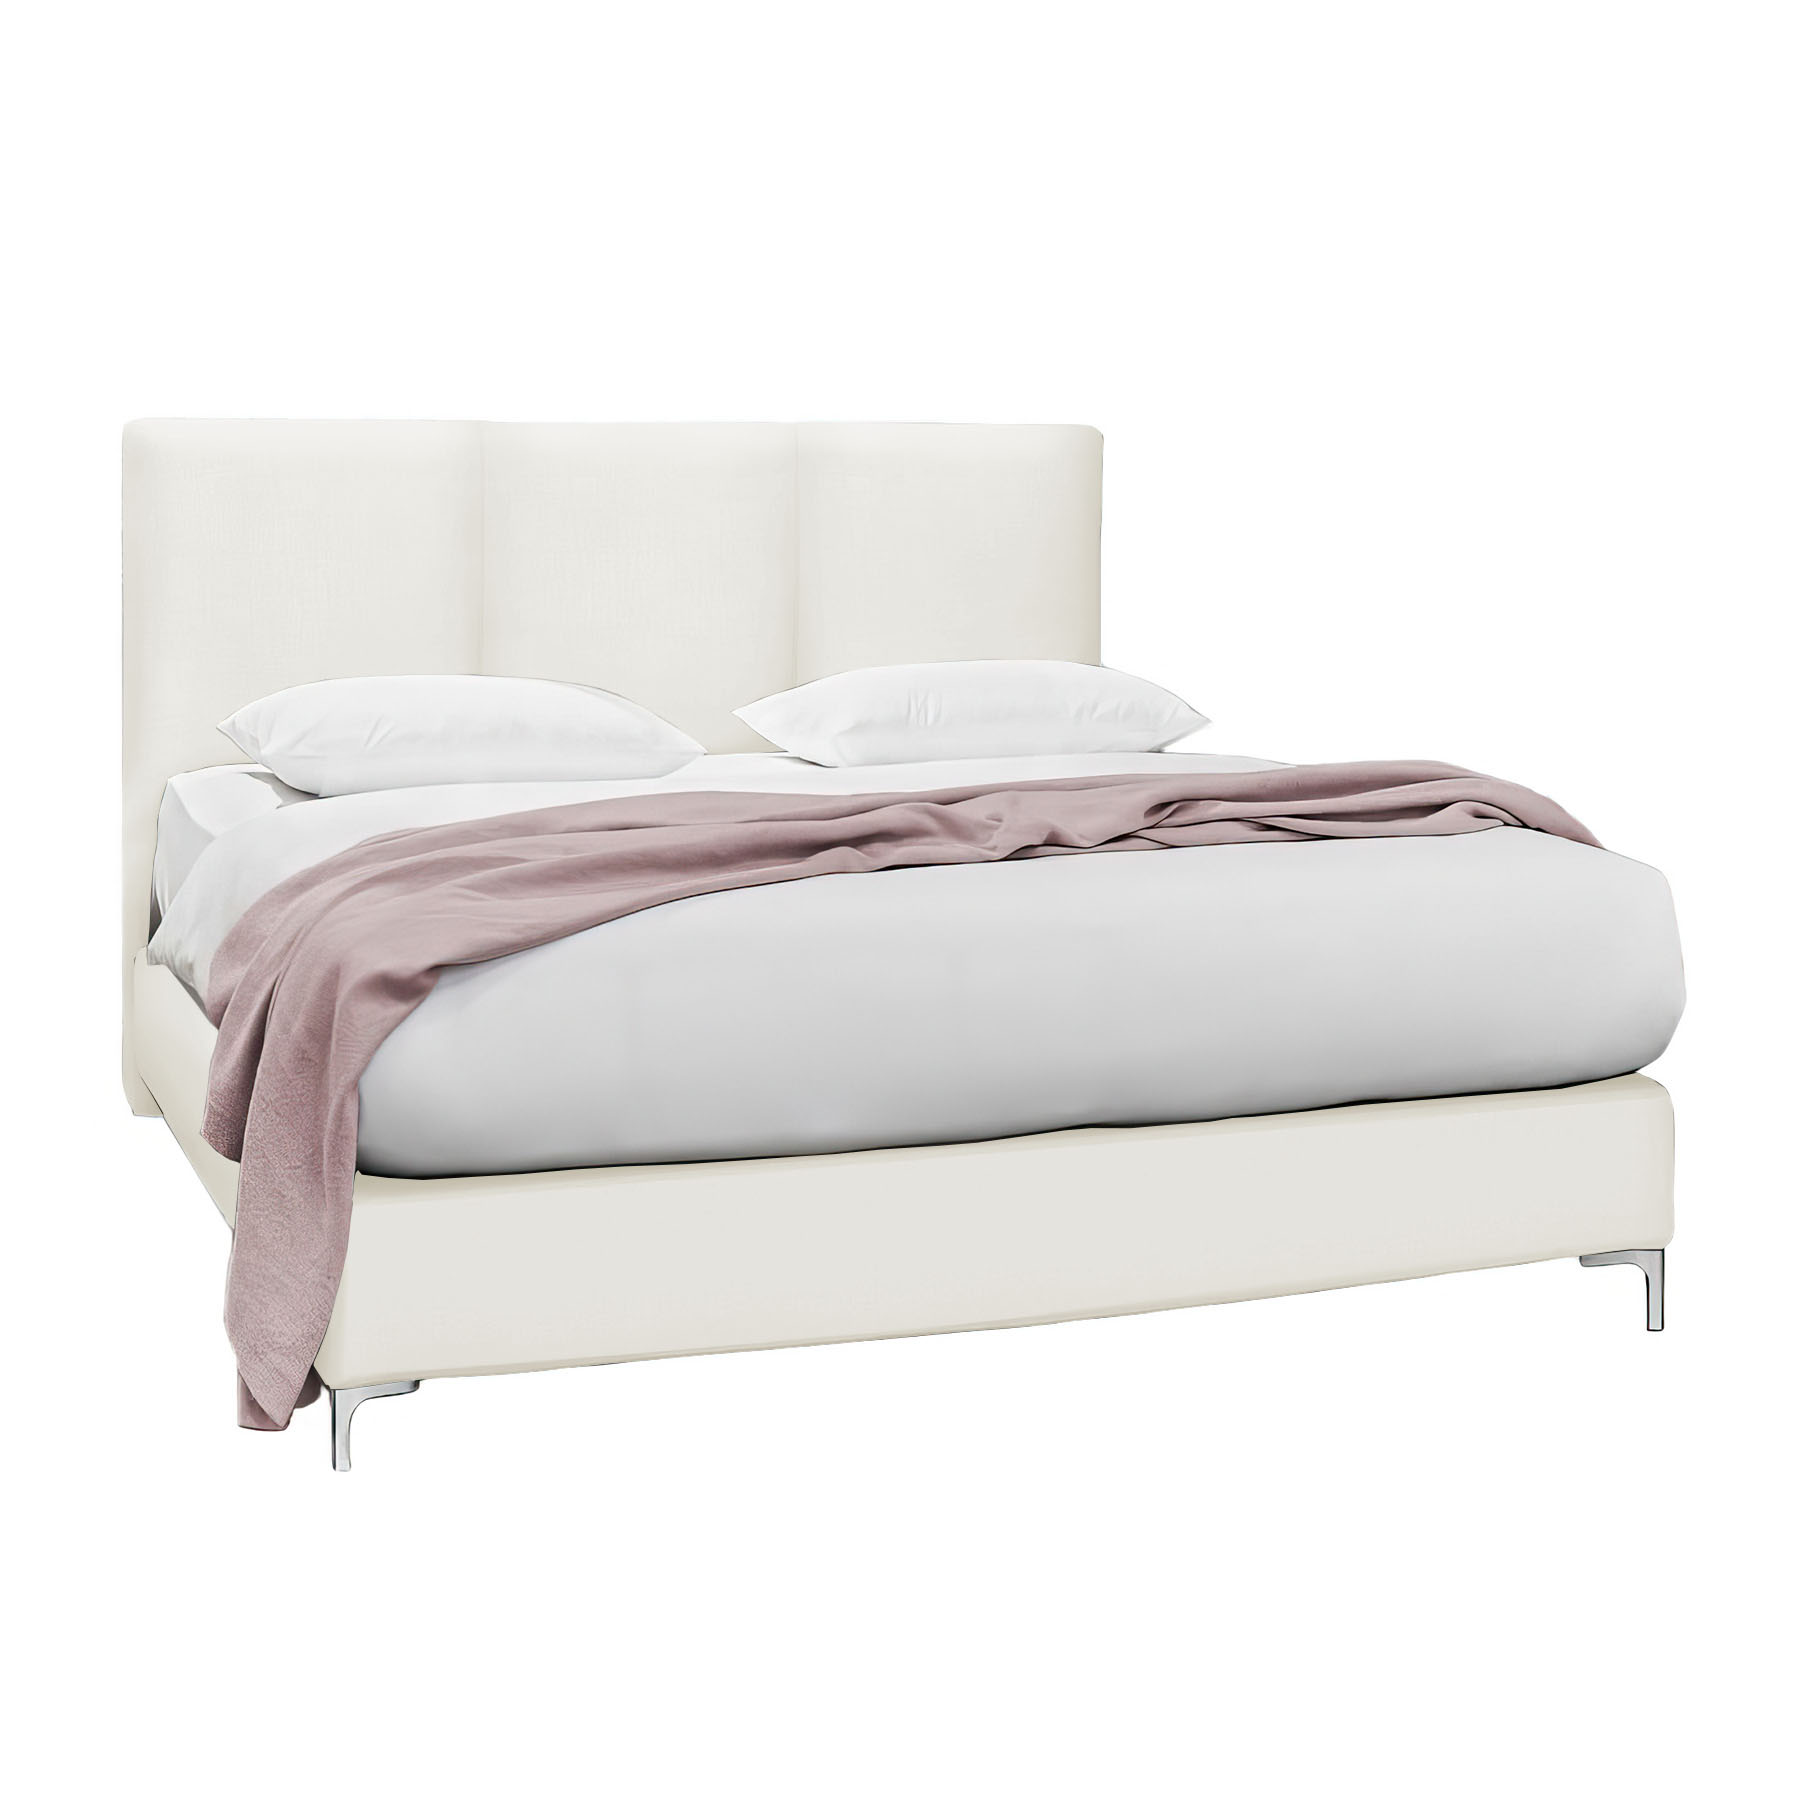 Boxspringbett Kate Select 140/210cm in Hot Madison Wollweiß